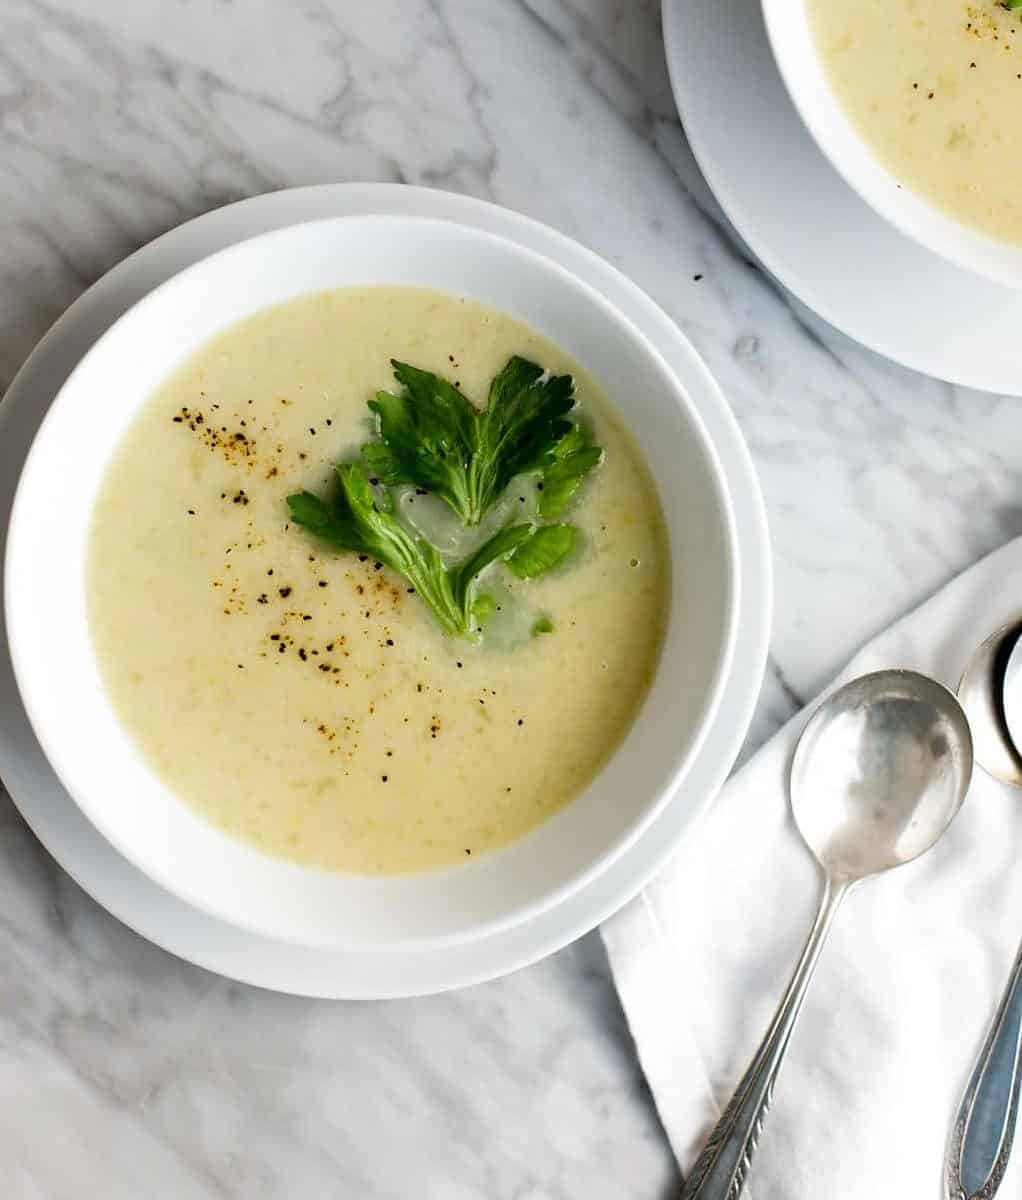  With its warm and cozy flavor, this vegan cream of celery soup is perfect for cozy nights in